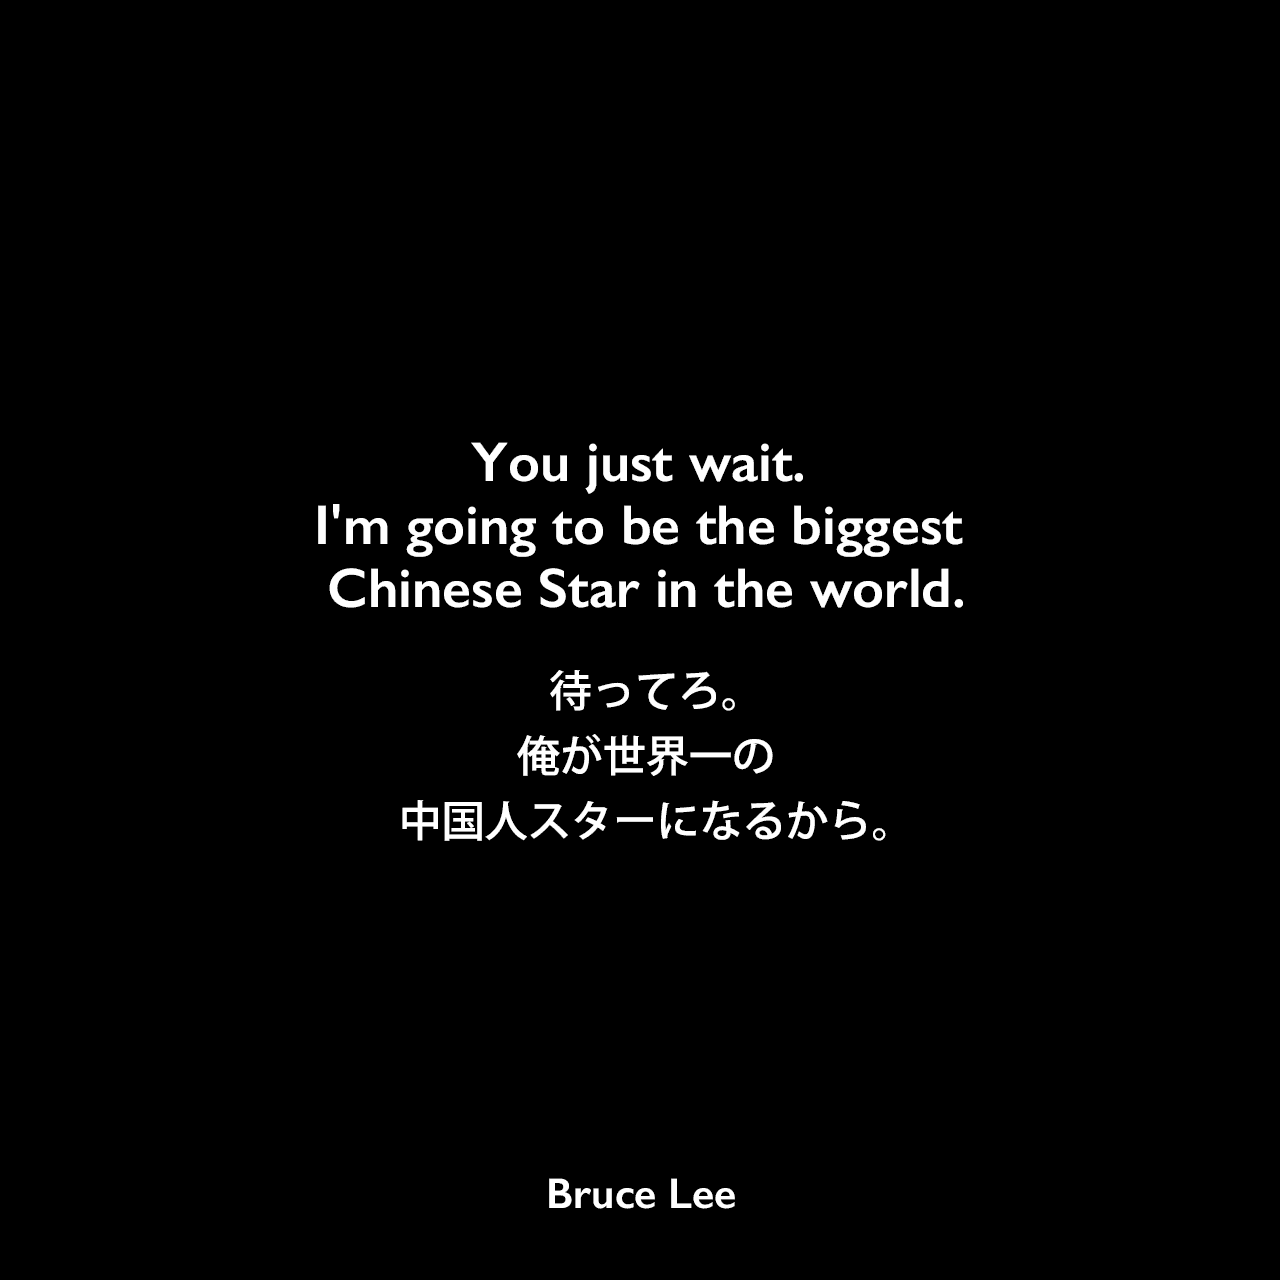 You just wait. I'm going to be the biggest Chinese Star in the world.待ってろ。俺が世界一の中国人スターになるから。Bruce Lee